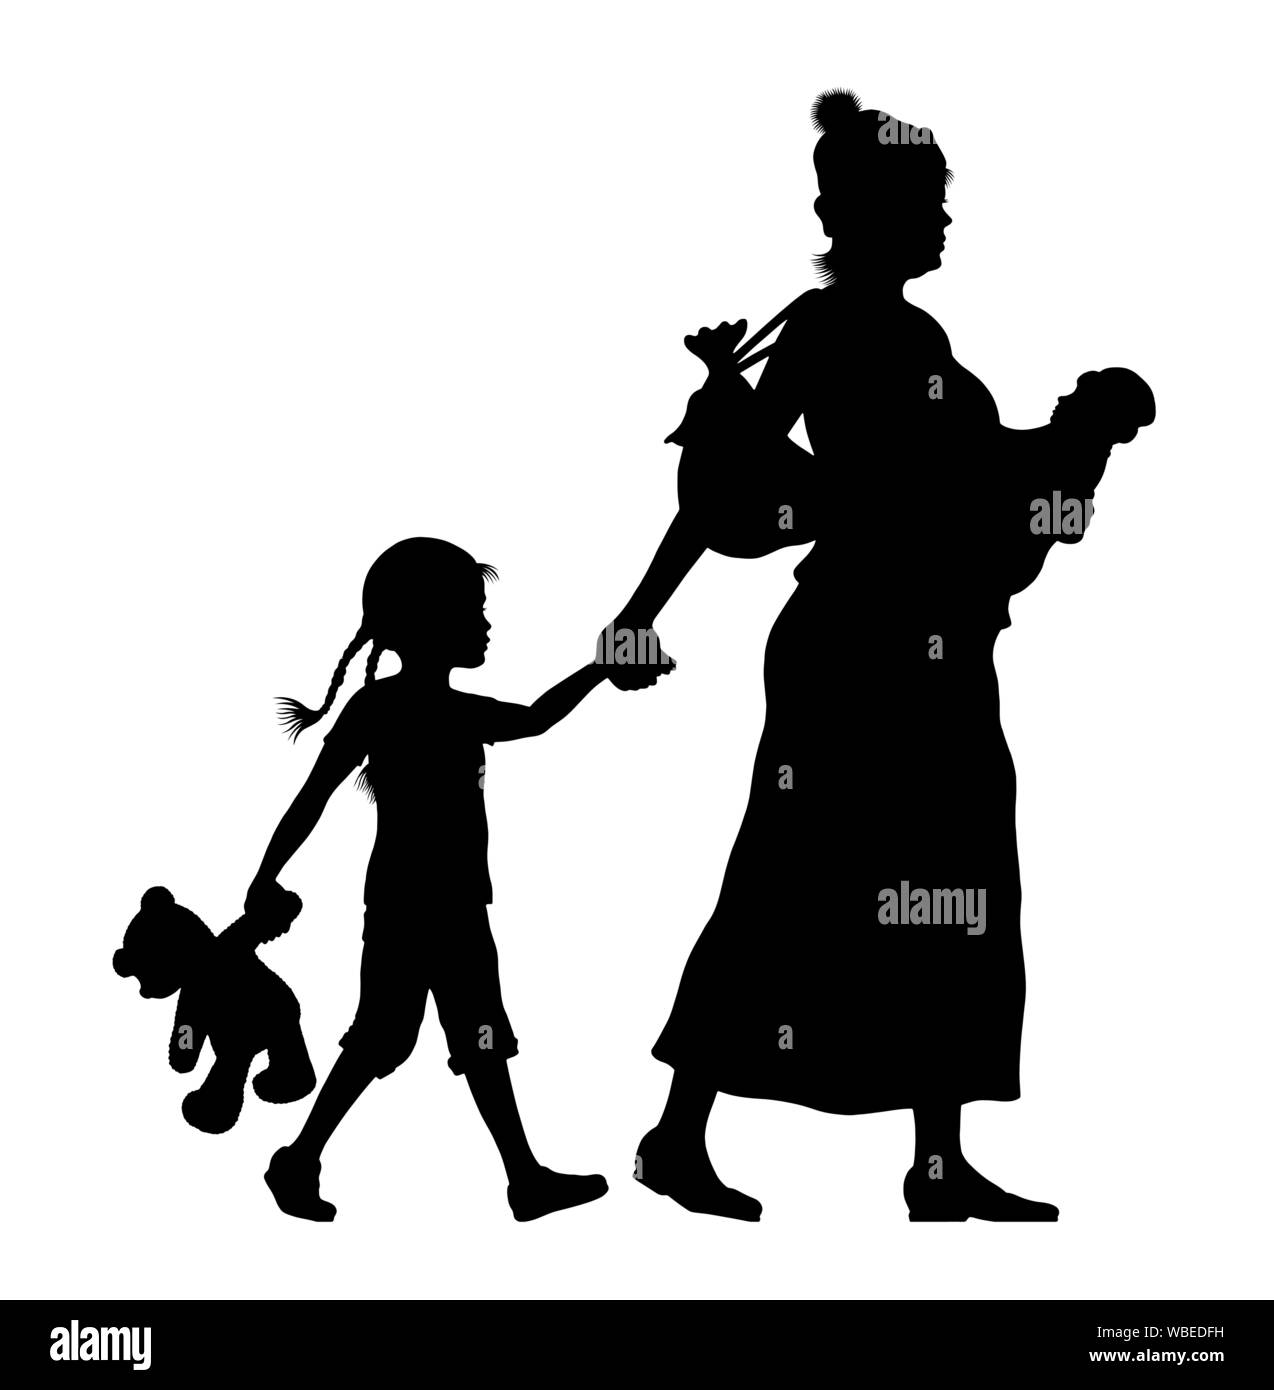 Refugee woman with her baby and little daughter silhouette. The silhouette objects and background are in different layers. Stock Vector